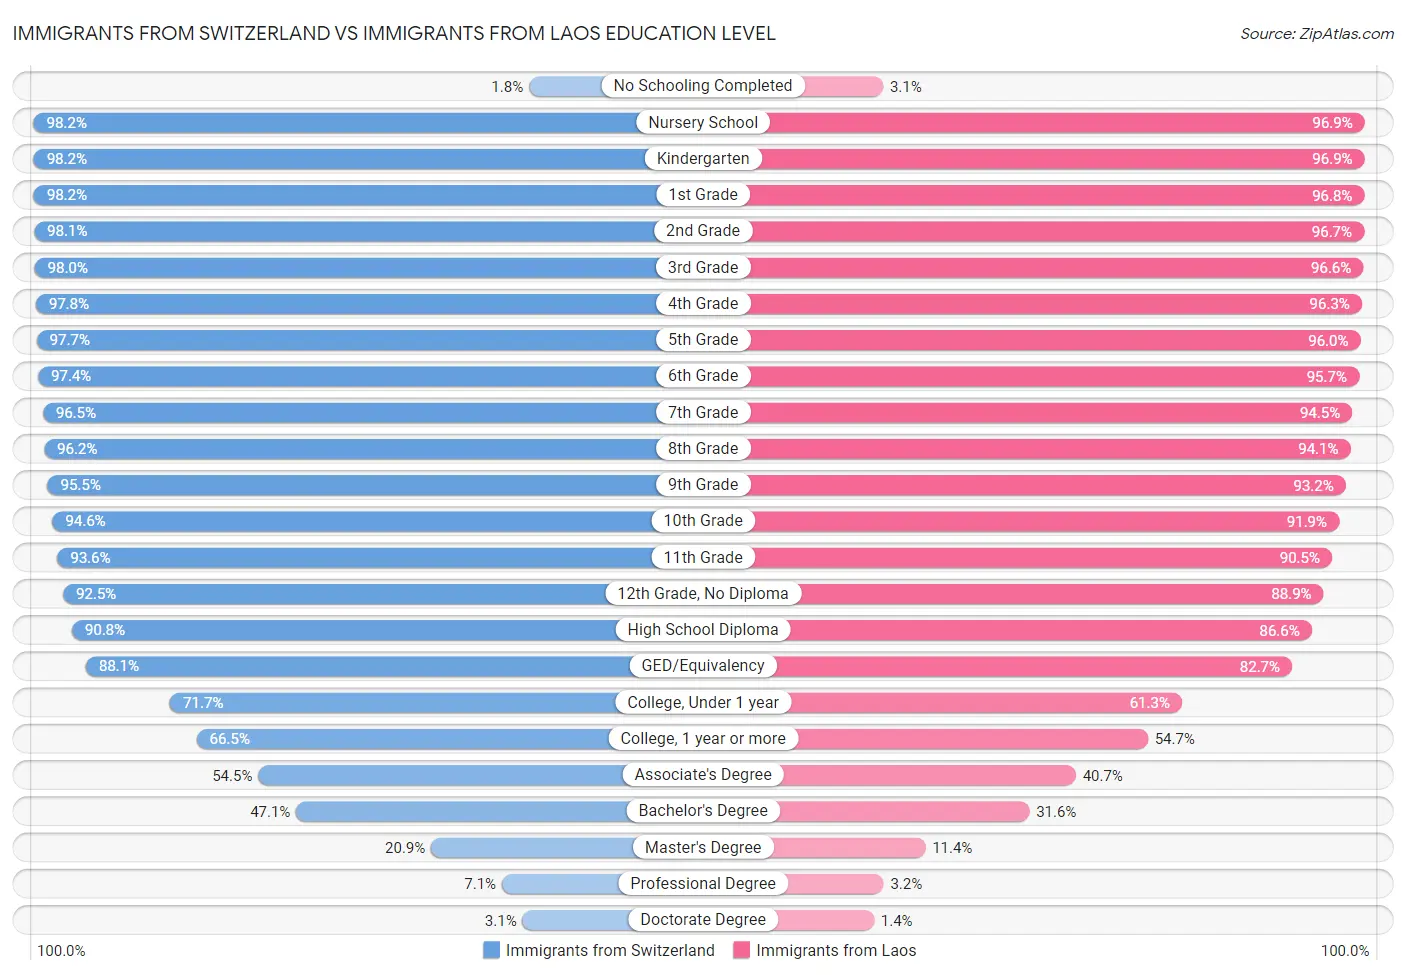 Immigrants from Switzerland vs Immigrants from Laos Education Level